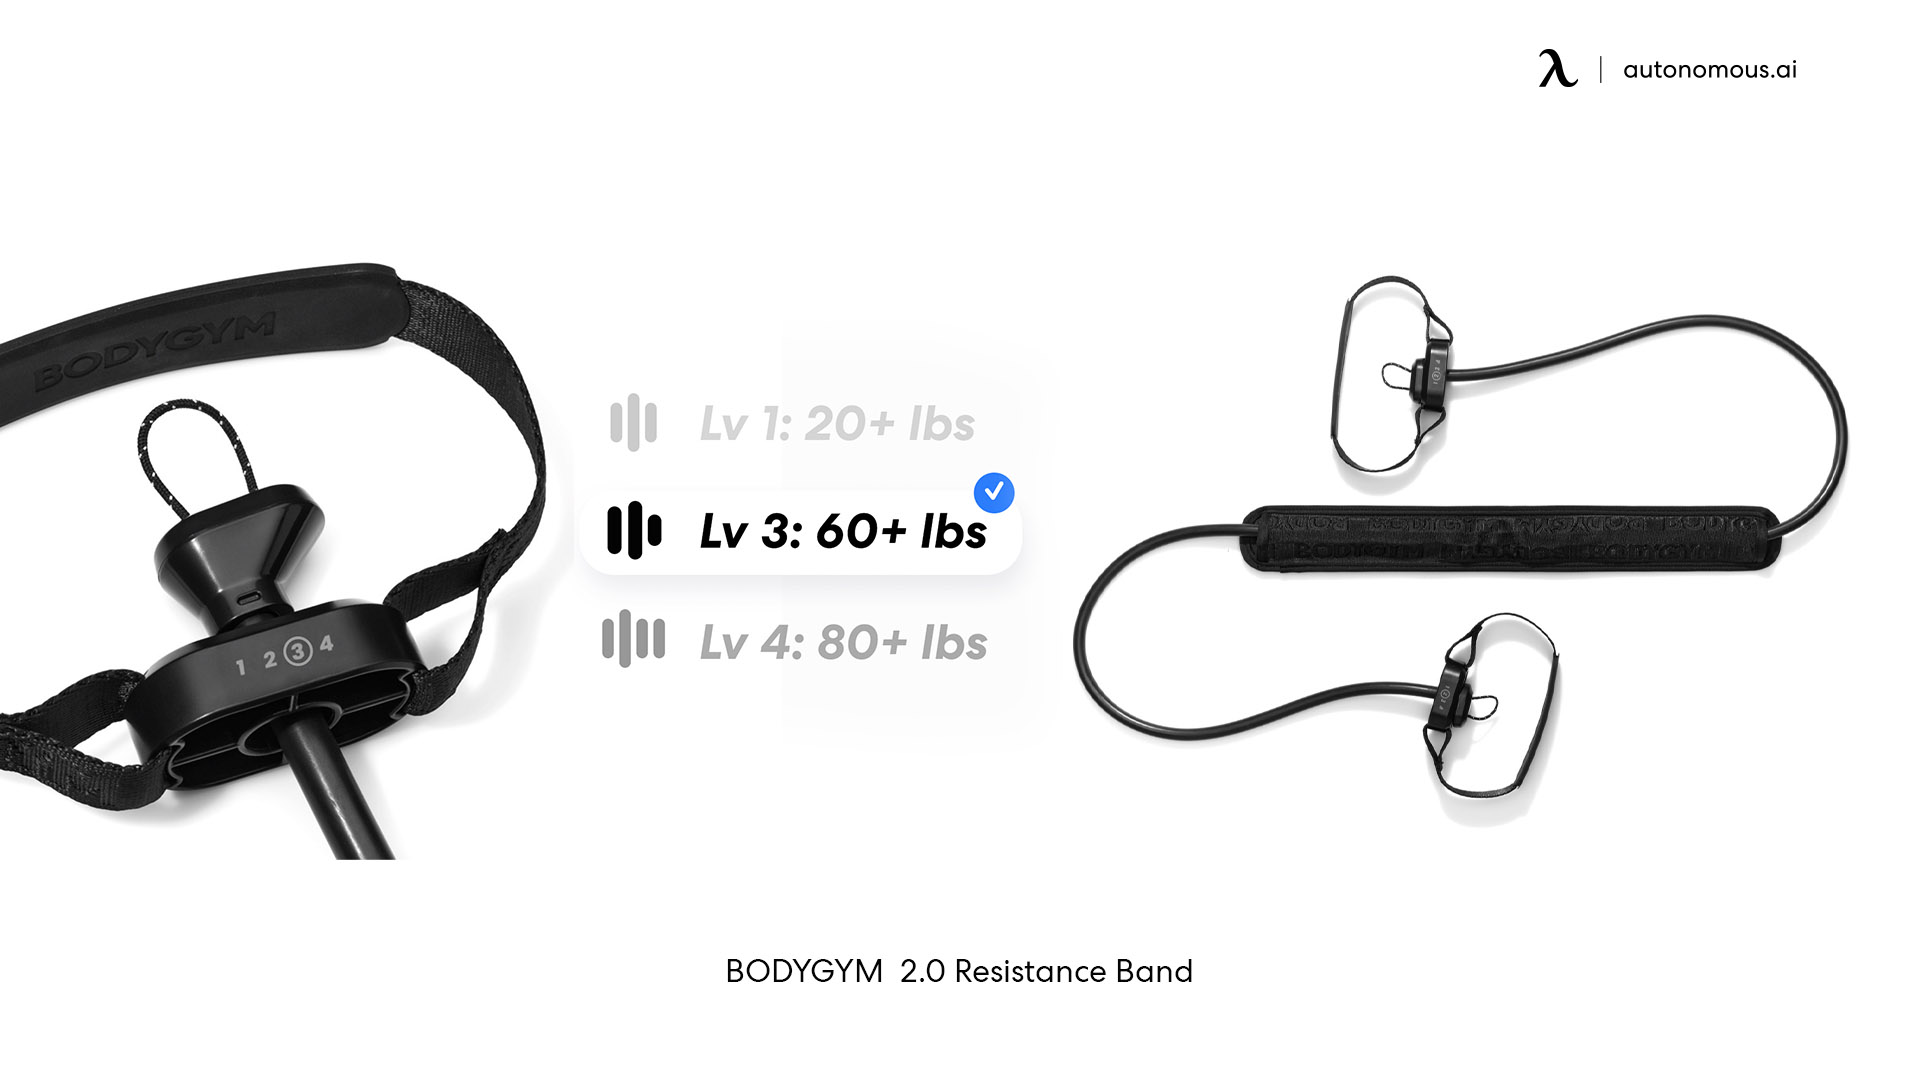 BODYGYM's 2.0 Resistance Band full-body workout equipment at home